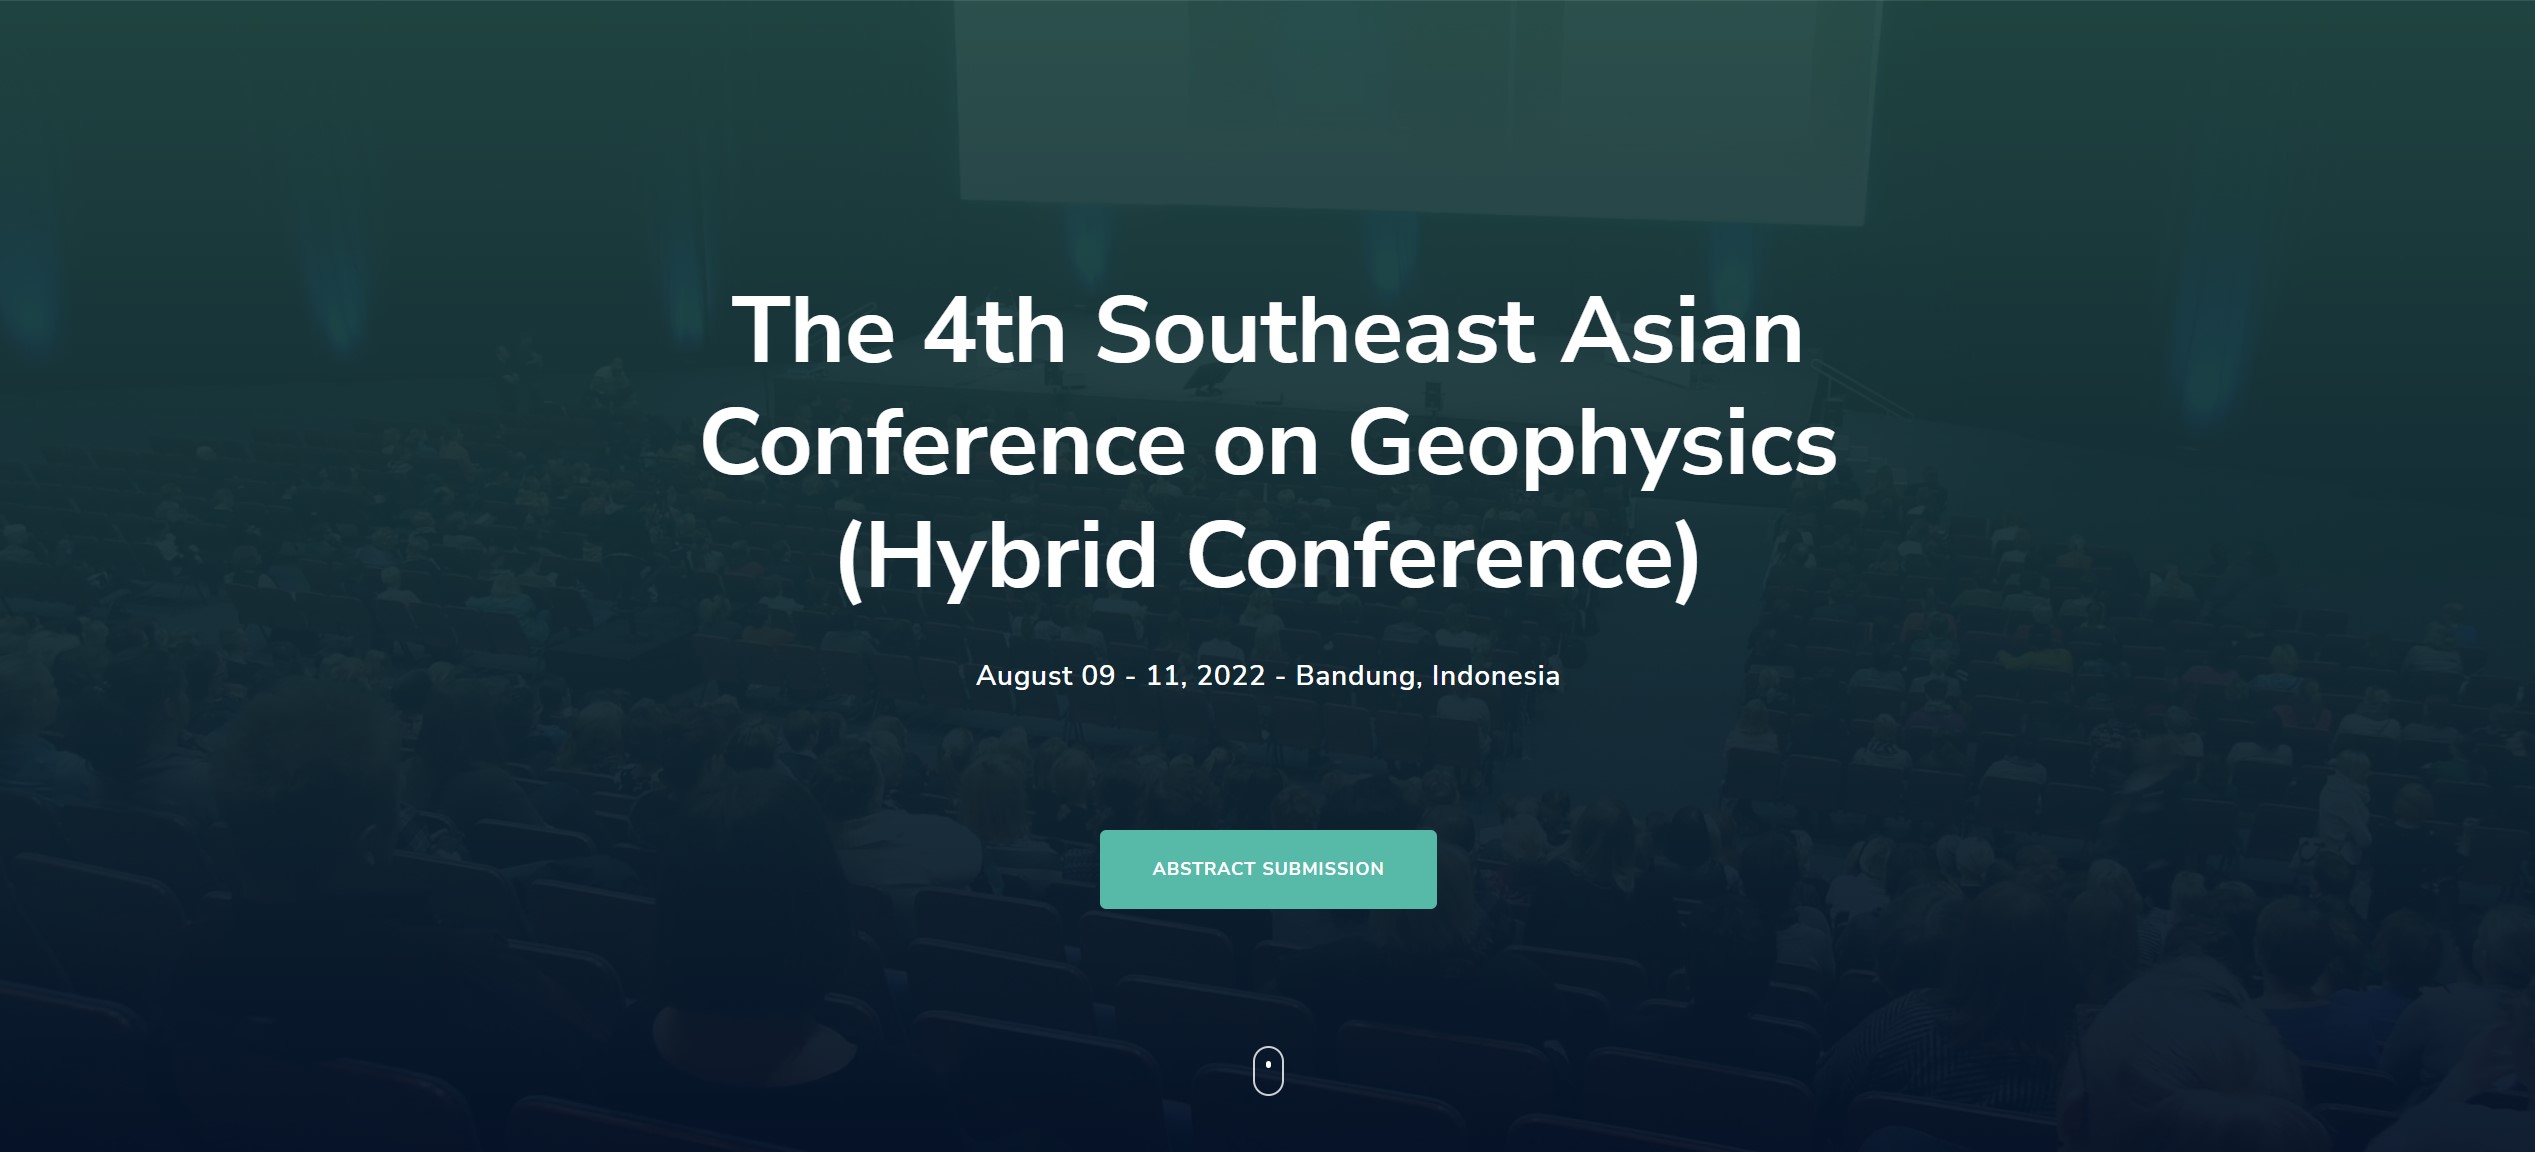 The Southeast Asian Conference on Geophysics (SEACG) 2022